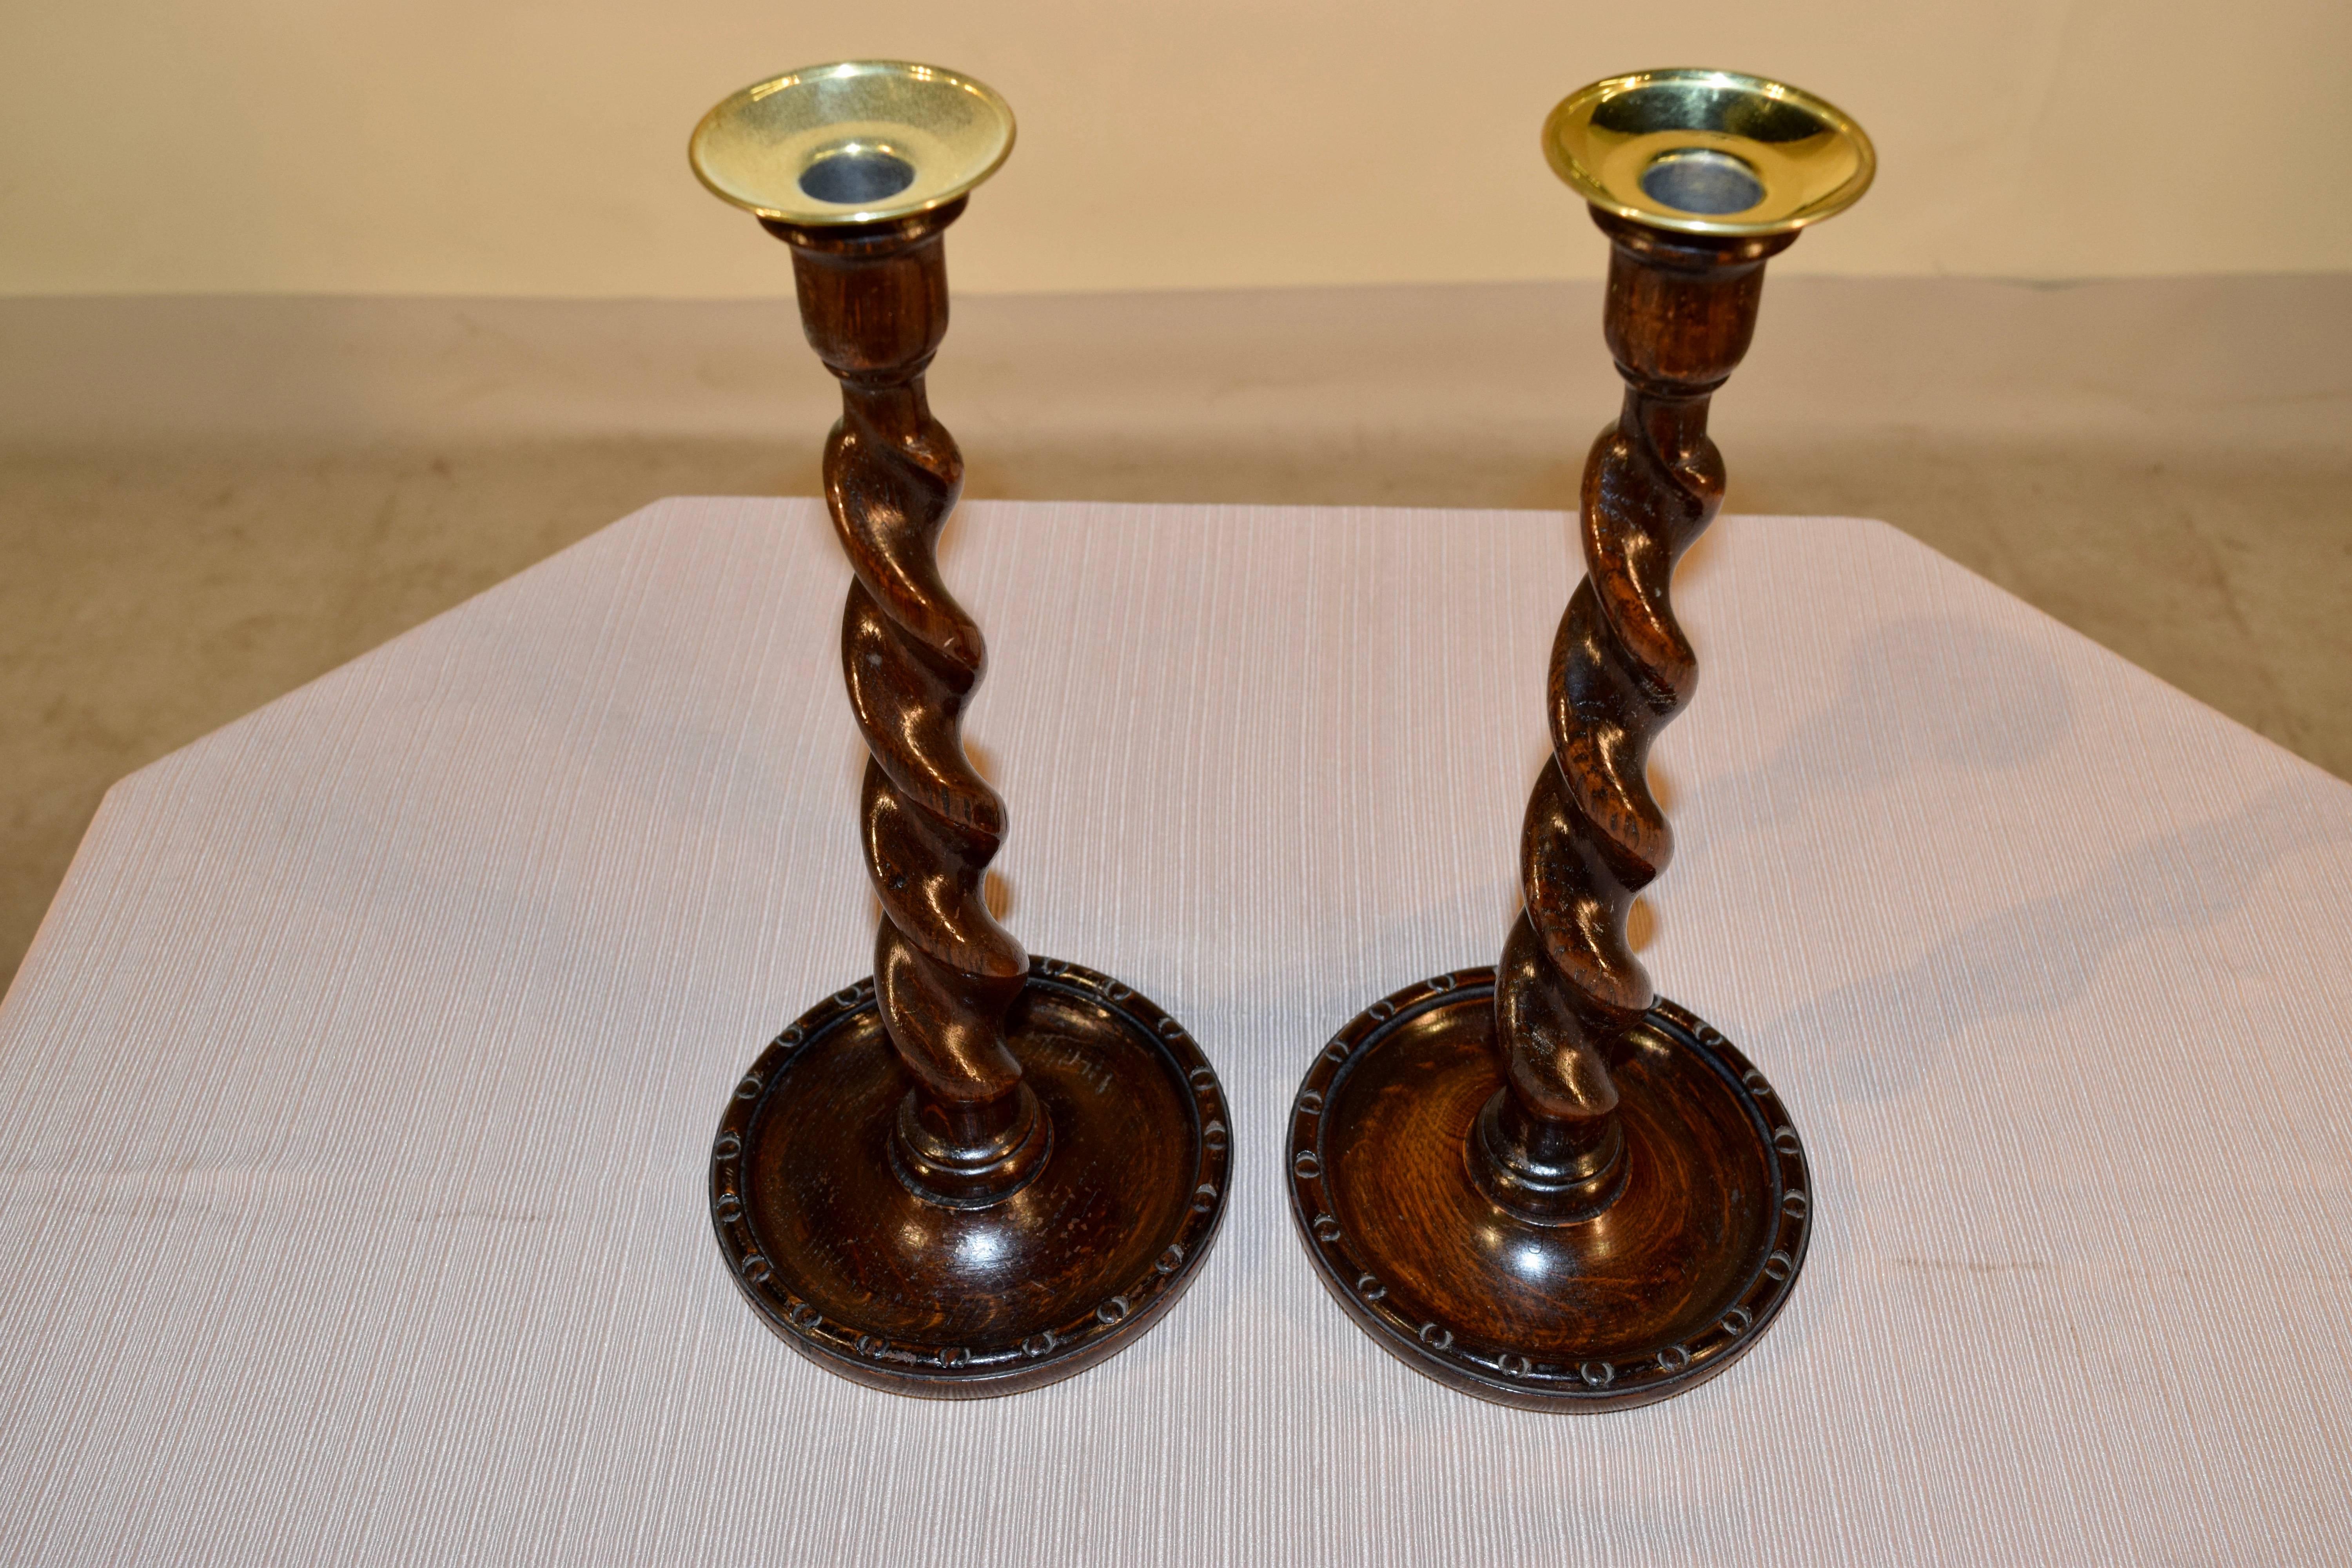 Late 19th century, pair of English oak candlesticks with hand-turned brass bobeches, and hand-turned barley twist stems supported on hand-turned dish shaped bases.